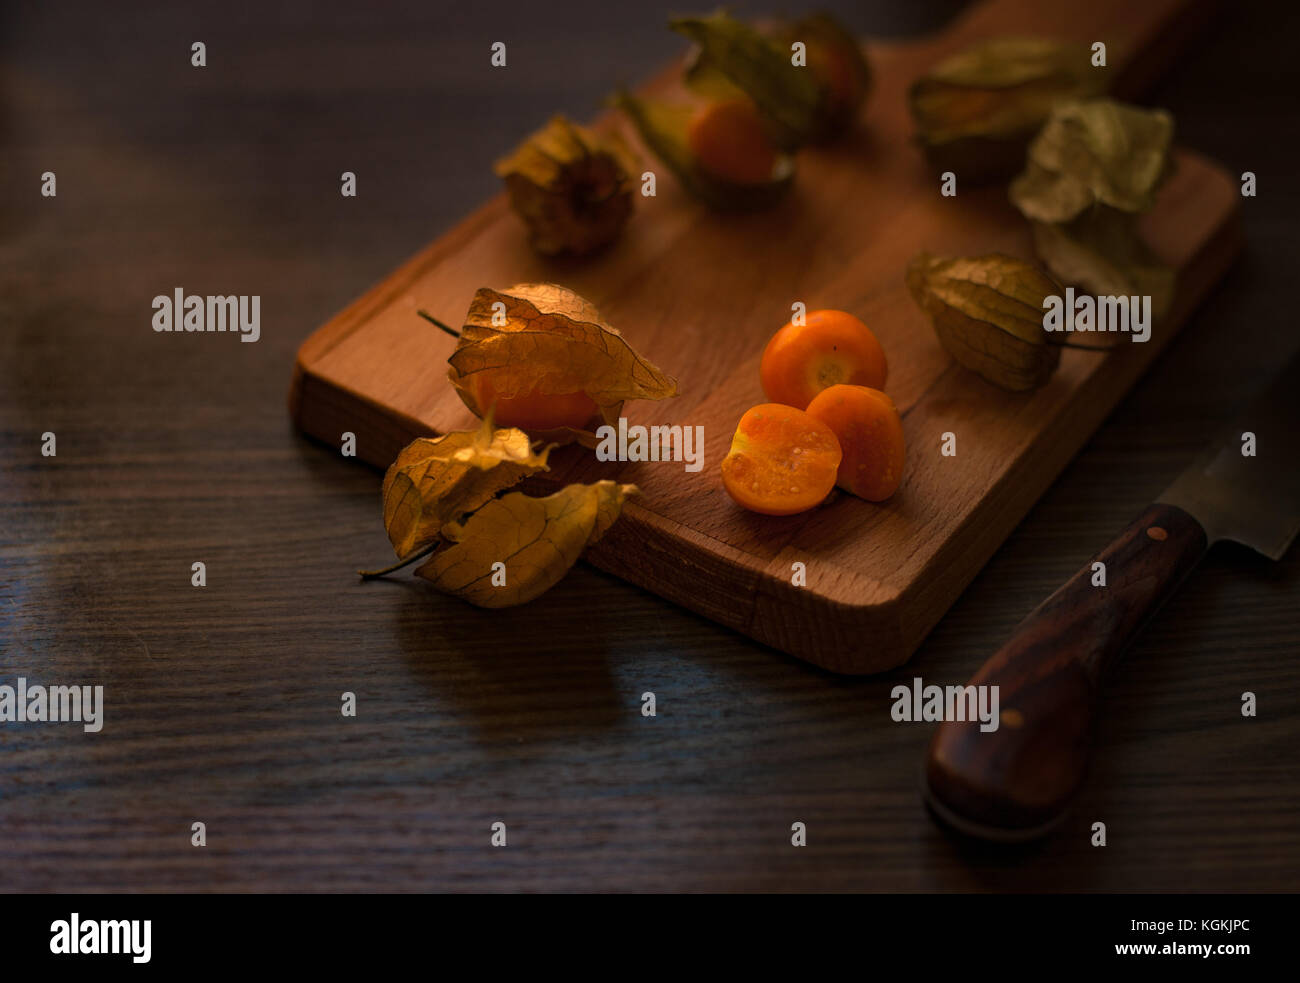 Physalis on a wooden board with kaki fruits and squash. Stock Photo